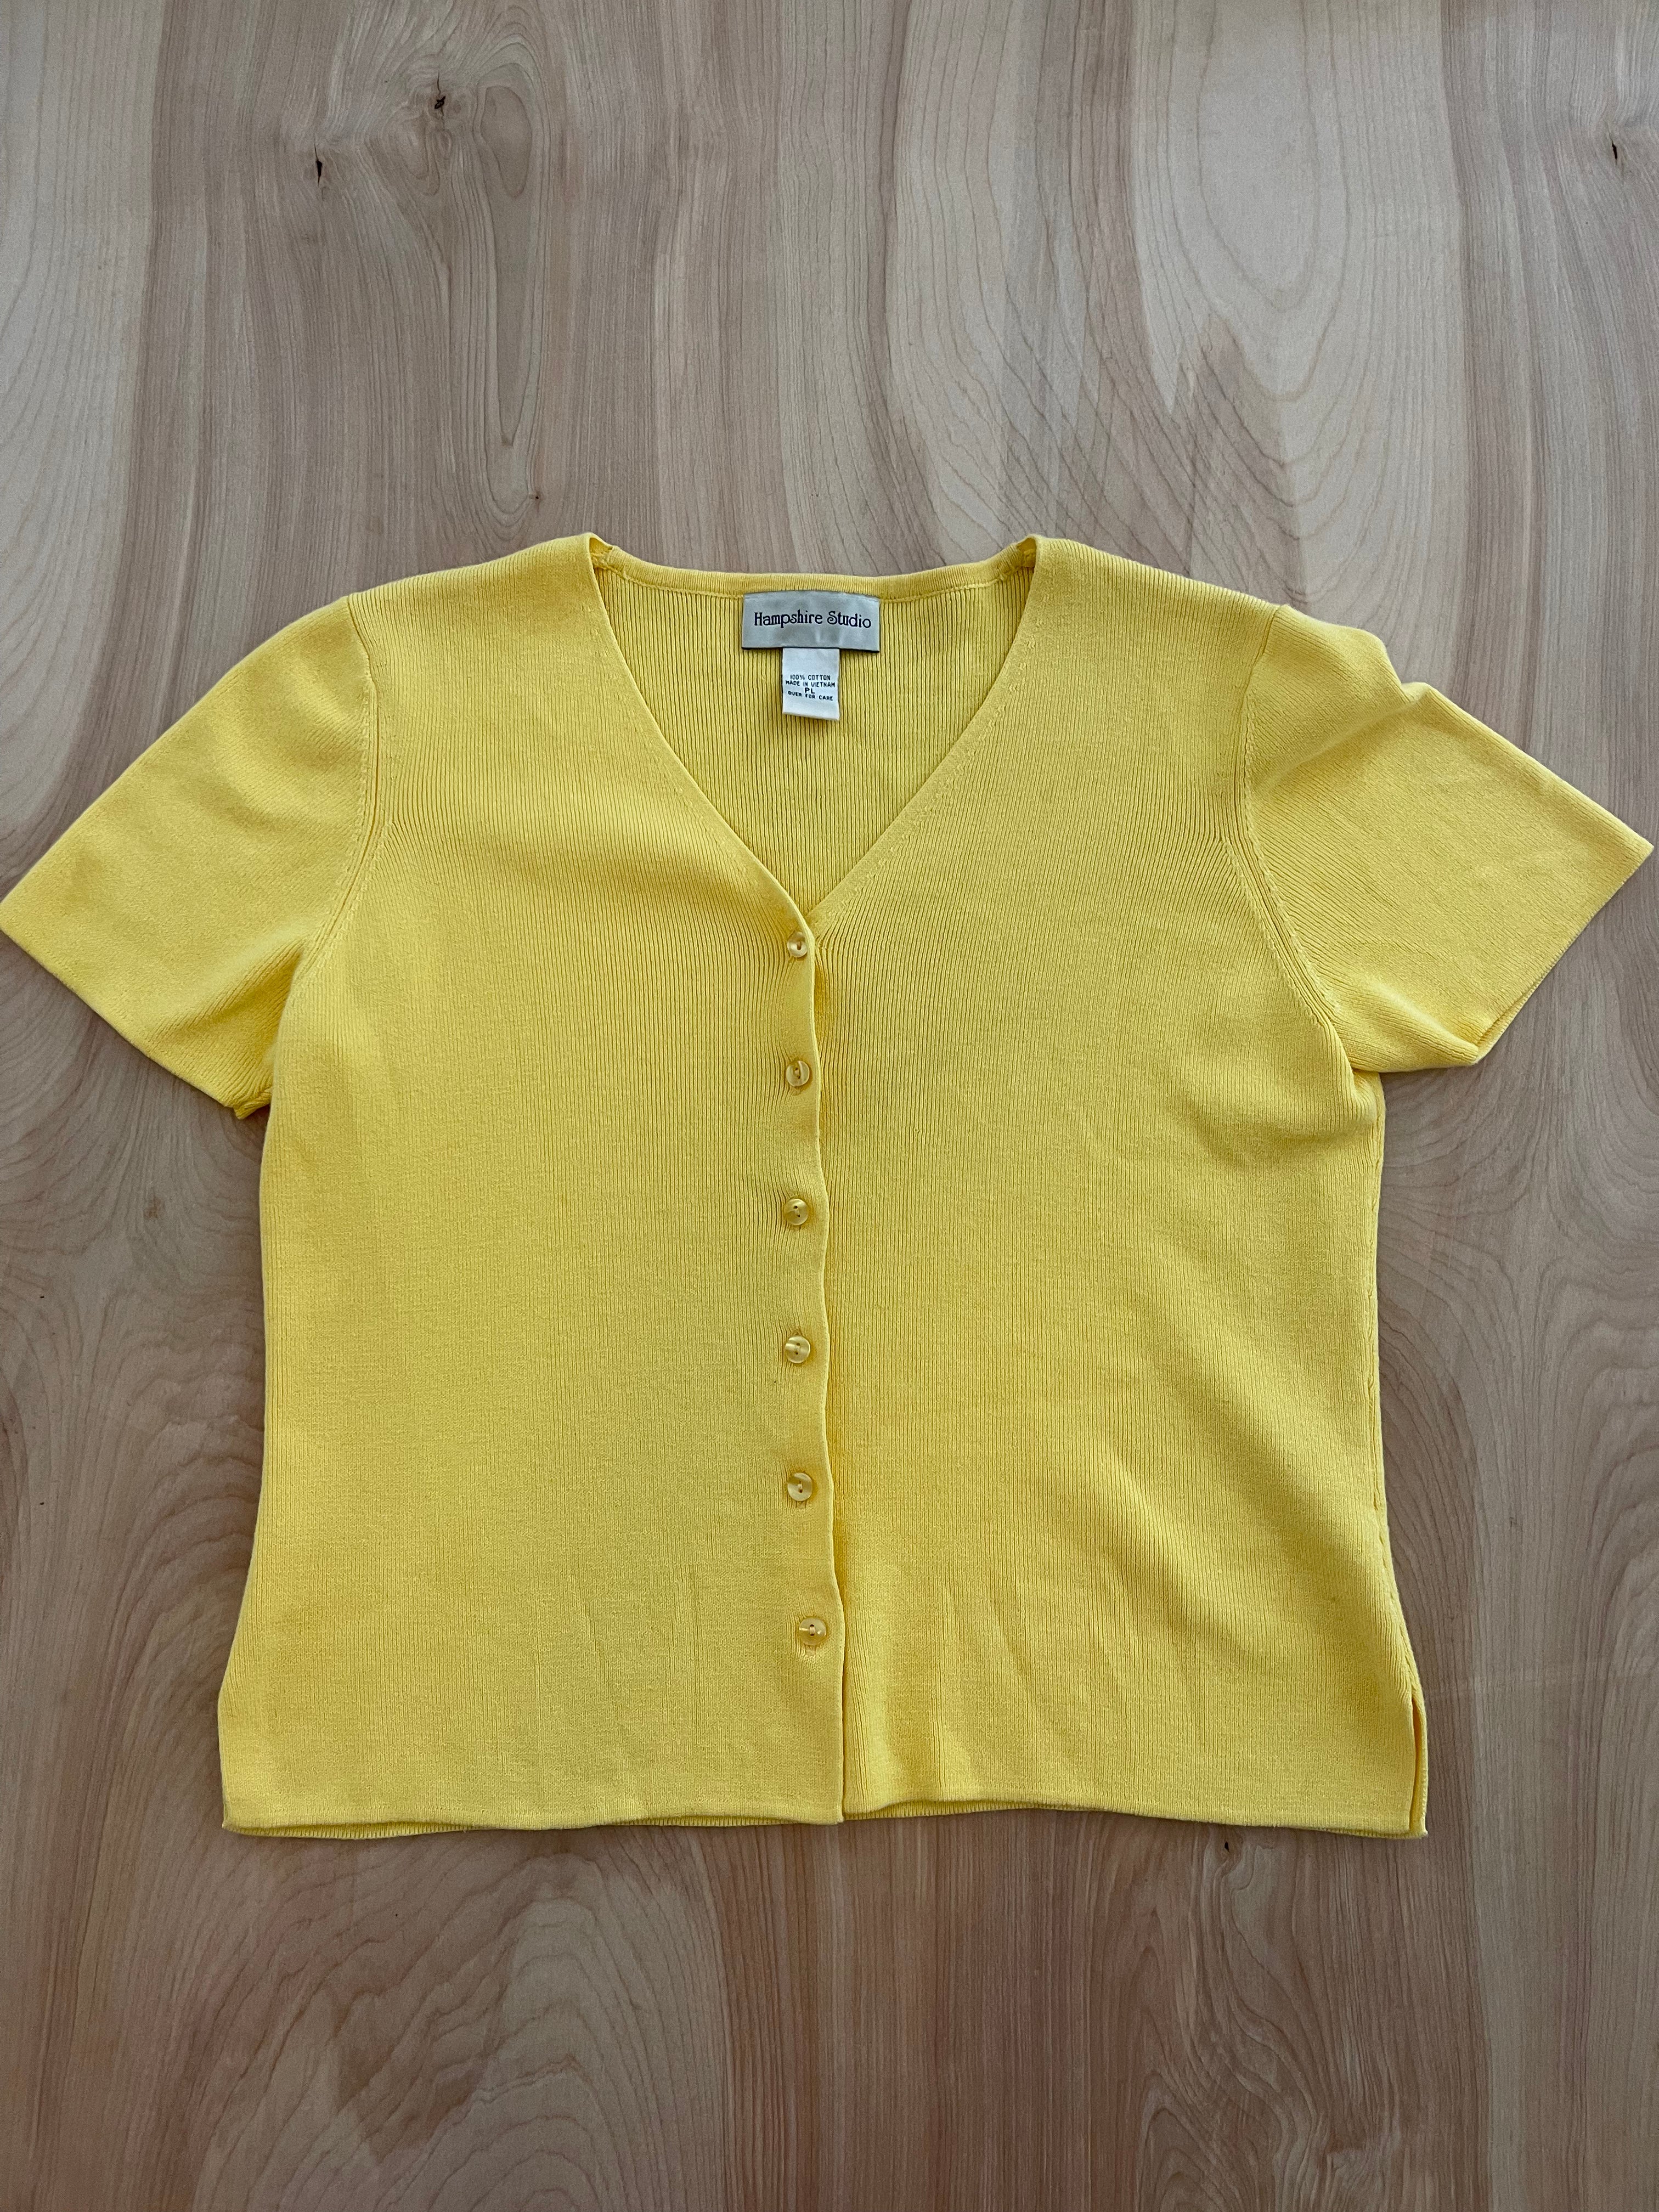 Yellow Button Up Tee